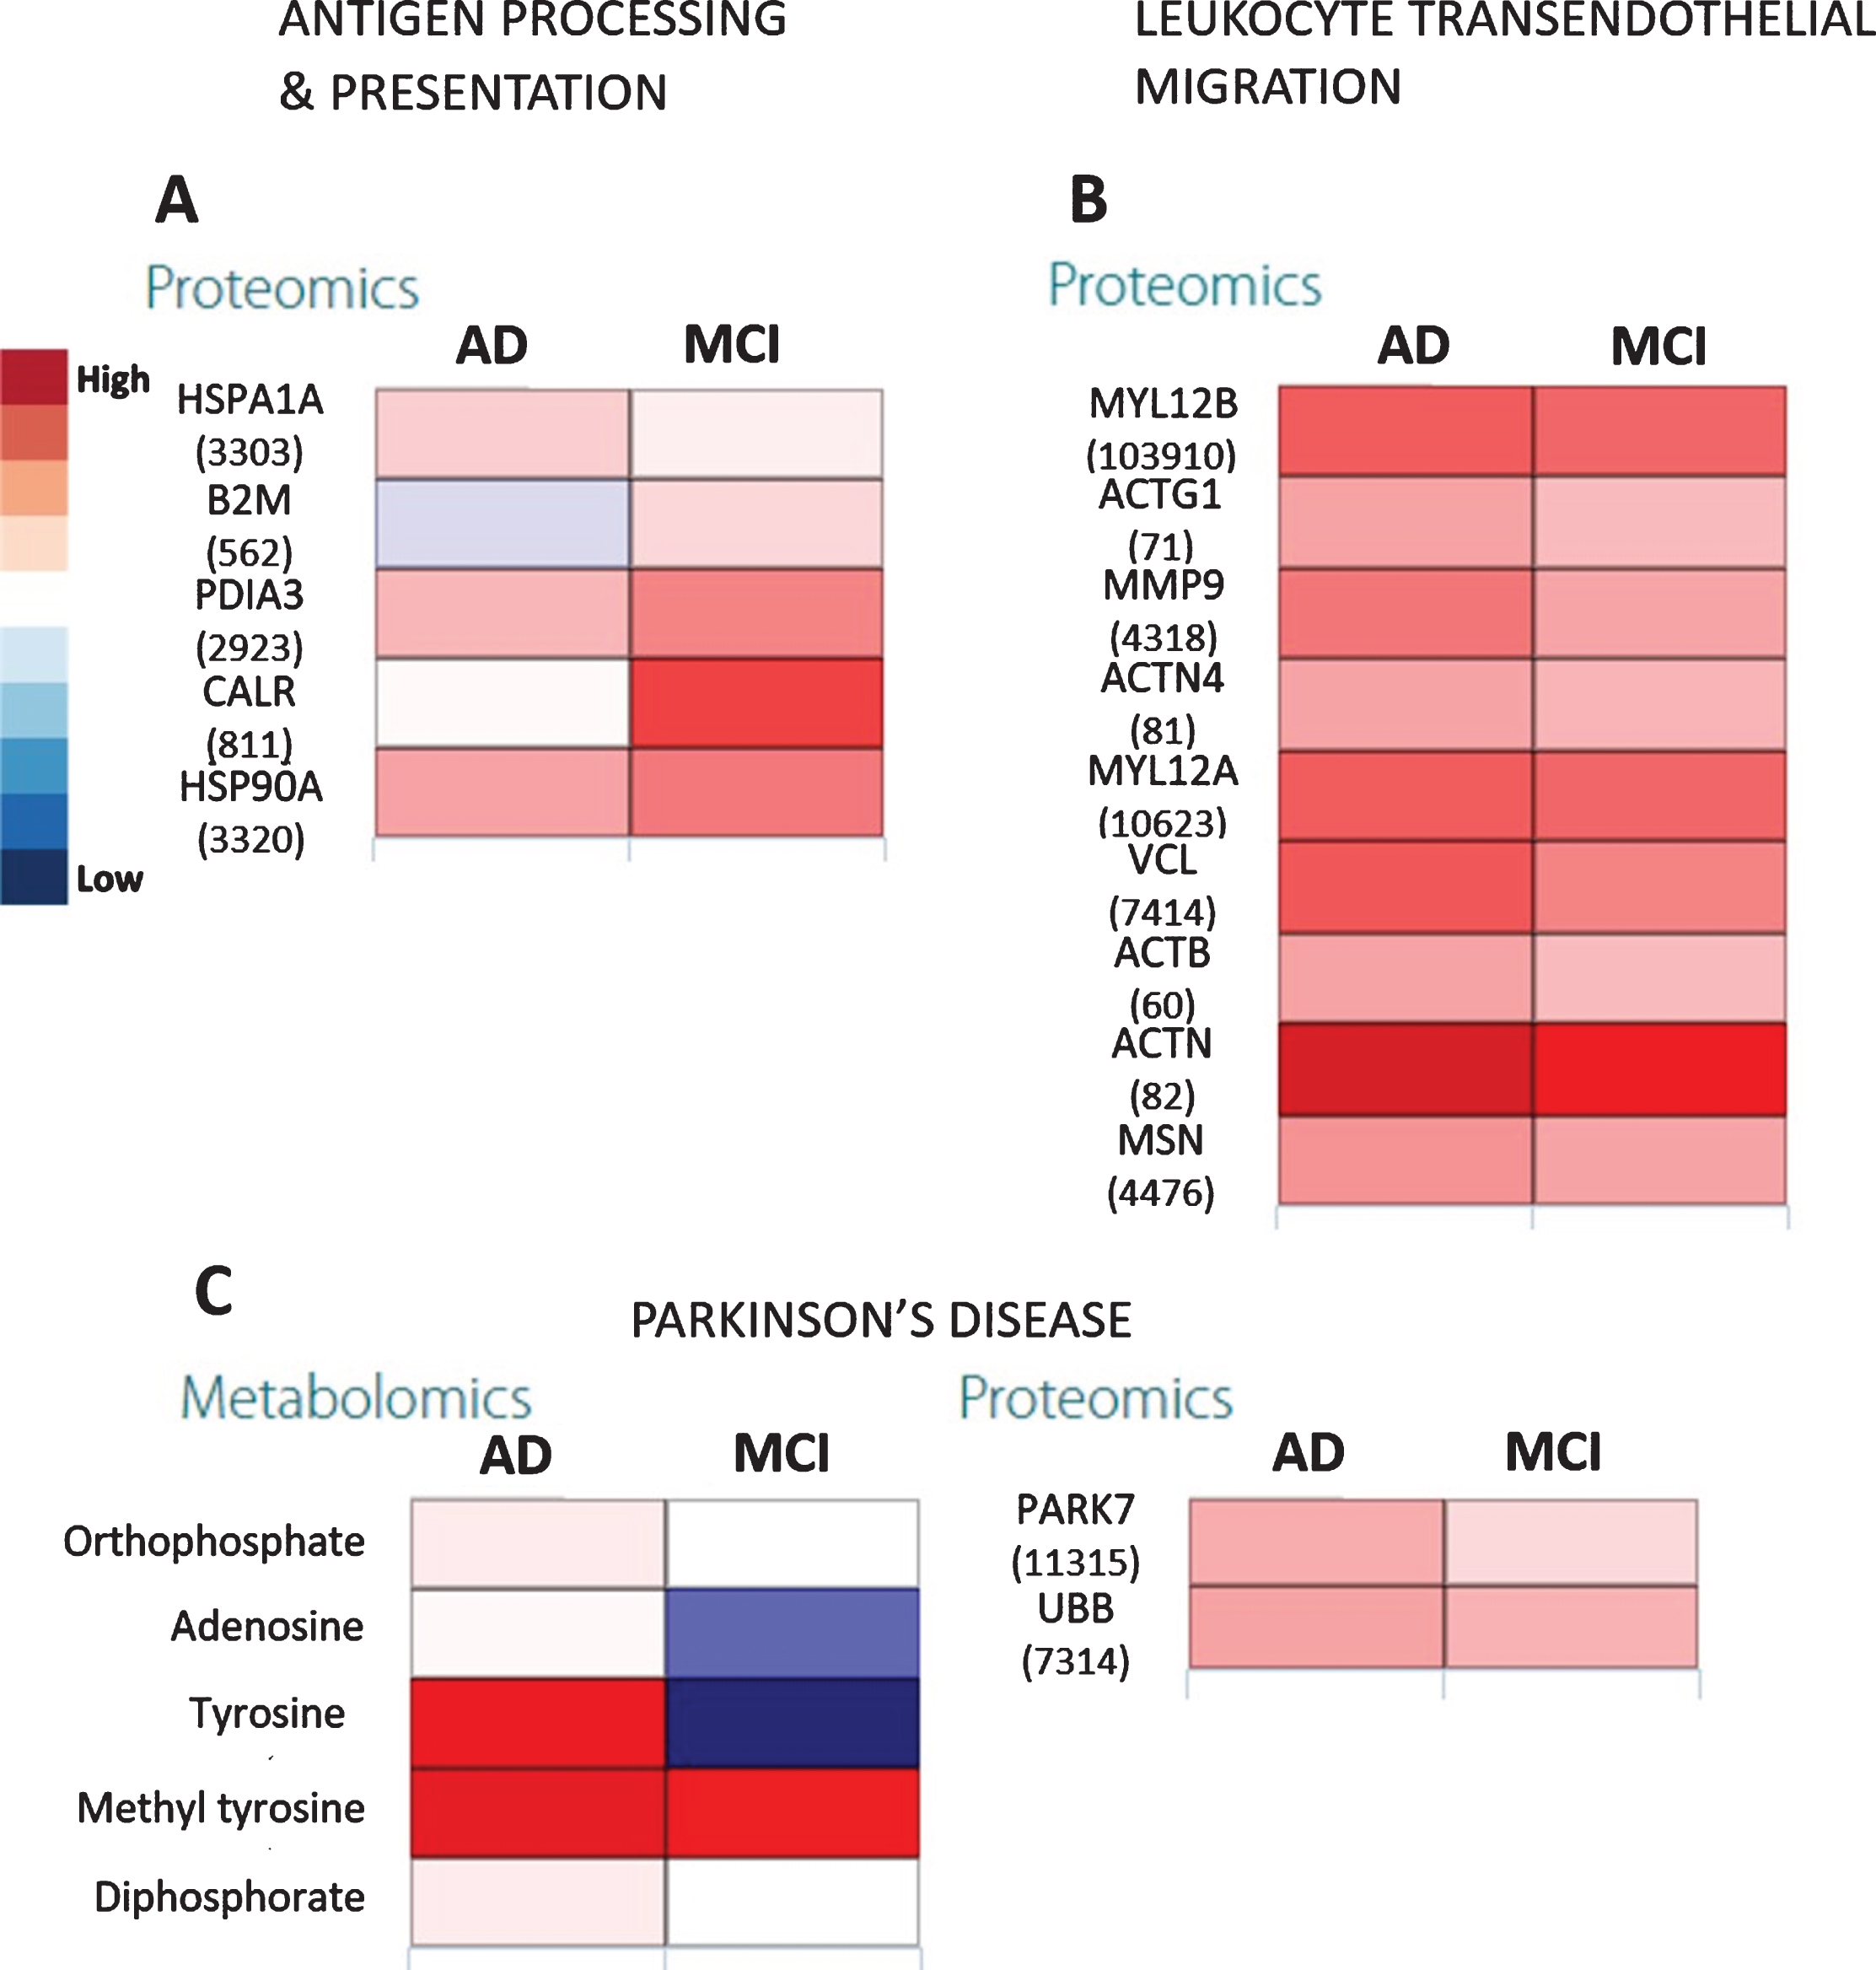 The heatmaps show proteomic expressions of (A) antigen processing and presentation and (B) leukocyte transendothelial migration in salivary matrix of AD and MCI patients with respect to their age- and gender-matched controls. C) Heatmaps showing proteomic expression during Parkinson’s disease in salivary matrix of AD and MCI patients with respect to controls. The metabolites and proteins used in the multi-omics integration were selected based on the fold changes (Log2FC≥1.00 or Log2FC≤–1.00) with statistically significant differences (False discovery rates (FDR≤0.05)). Note: The numerical IDs in parenthesis indicate Entrez Gene IDs of the proteins involved in these pathways.